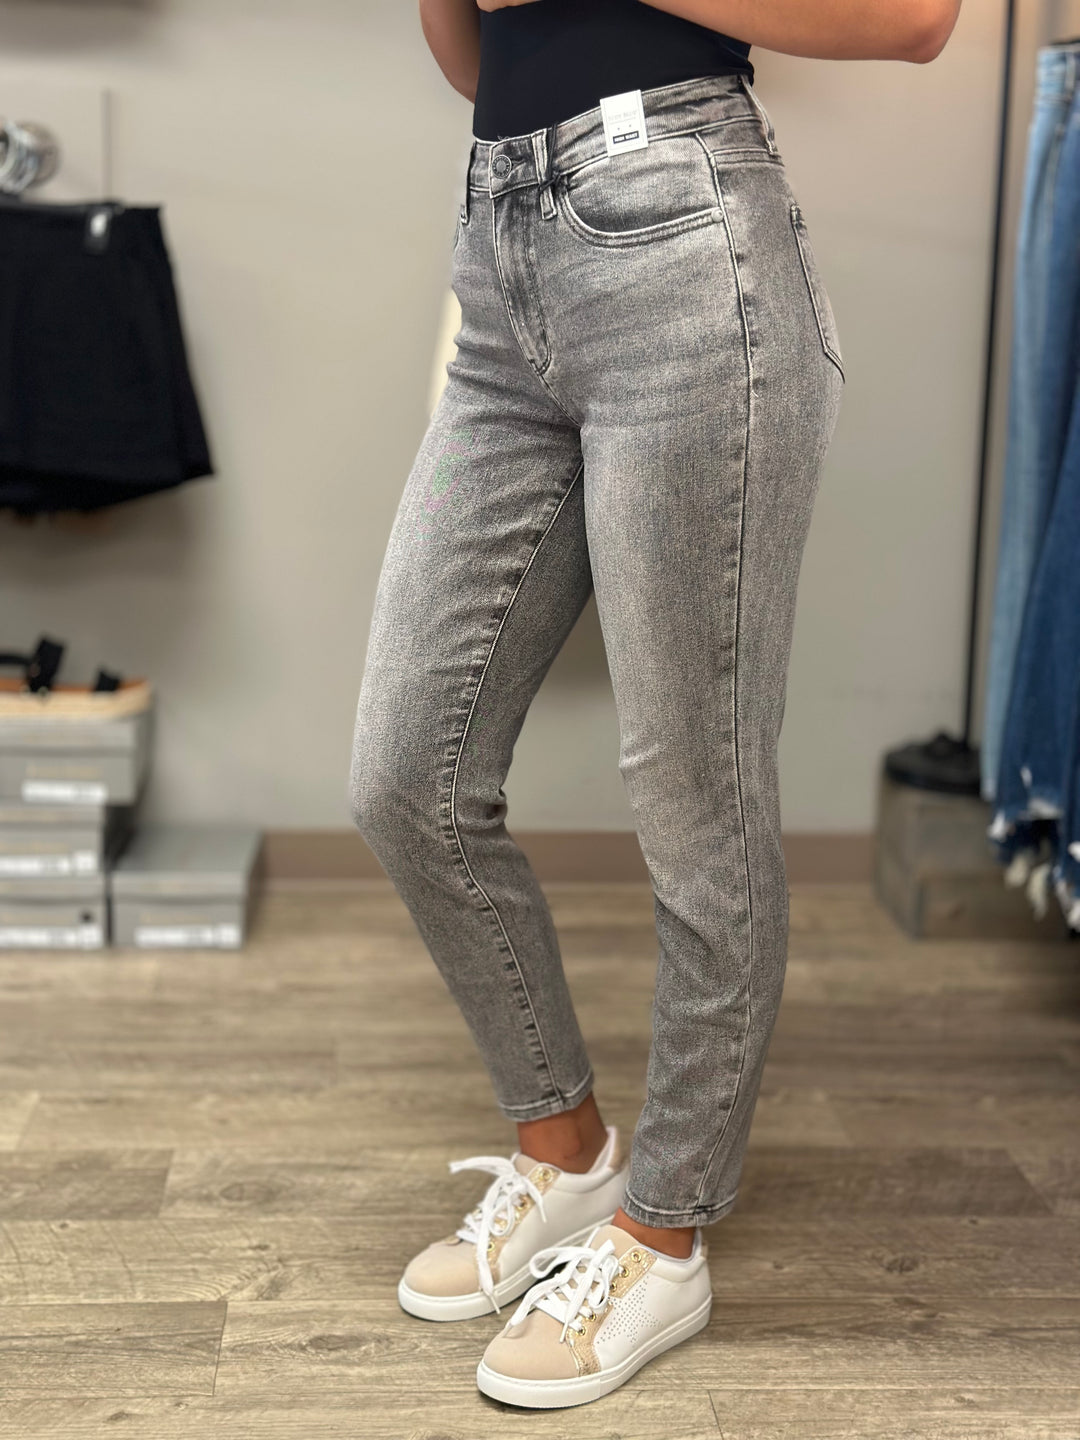 Judy Blue So Fetch High Rise Stone Wash Jeans-Jeans-Judy Blue-Evergreen Boutique, Women’s Fashion Boutique in Santa Claus, Indiana